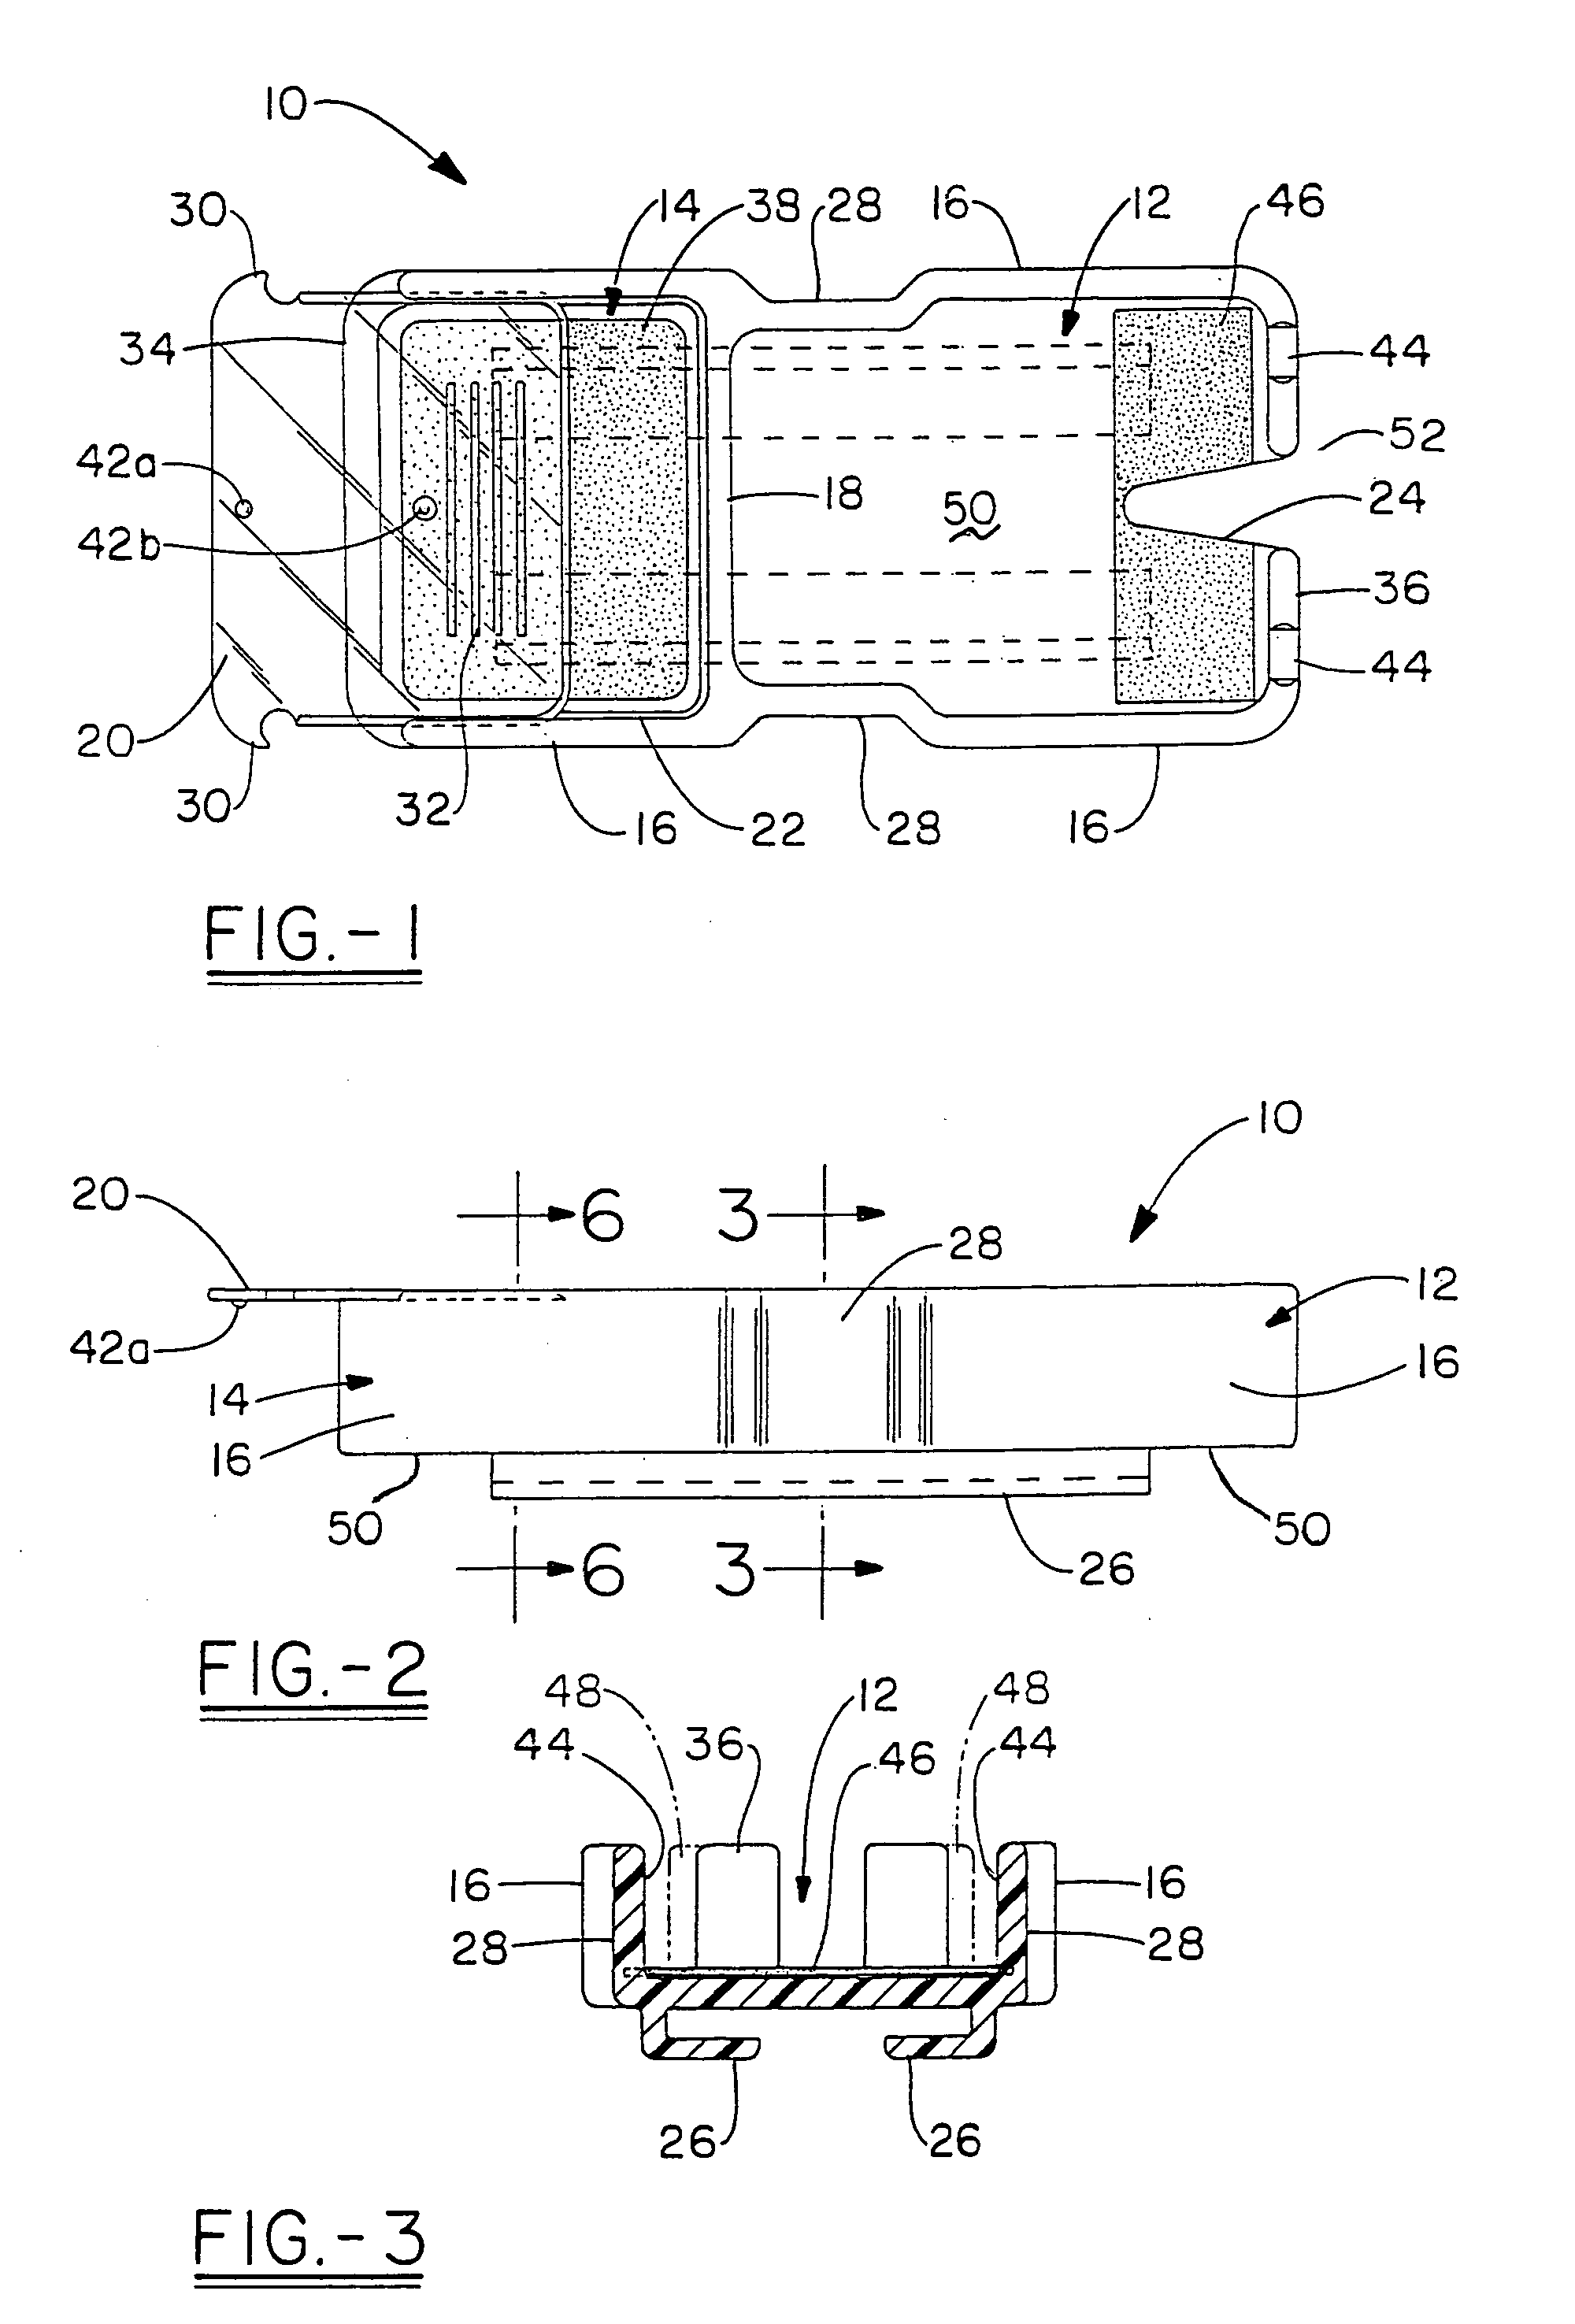 Apparatus for sharp implement transfer, counting and temporary disposal or storage